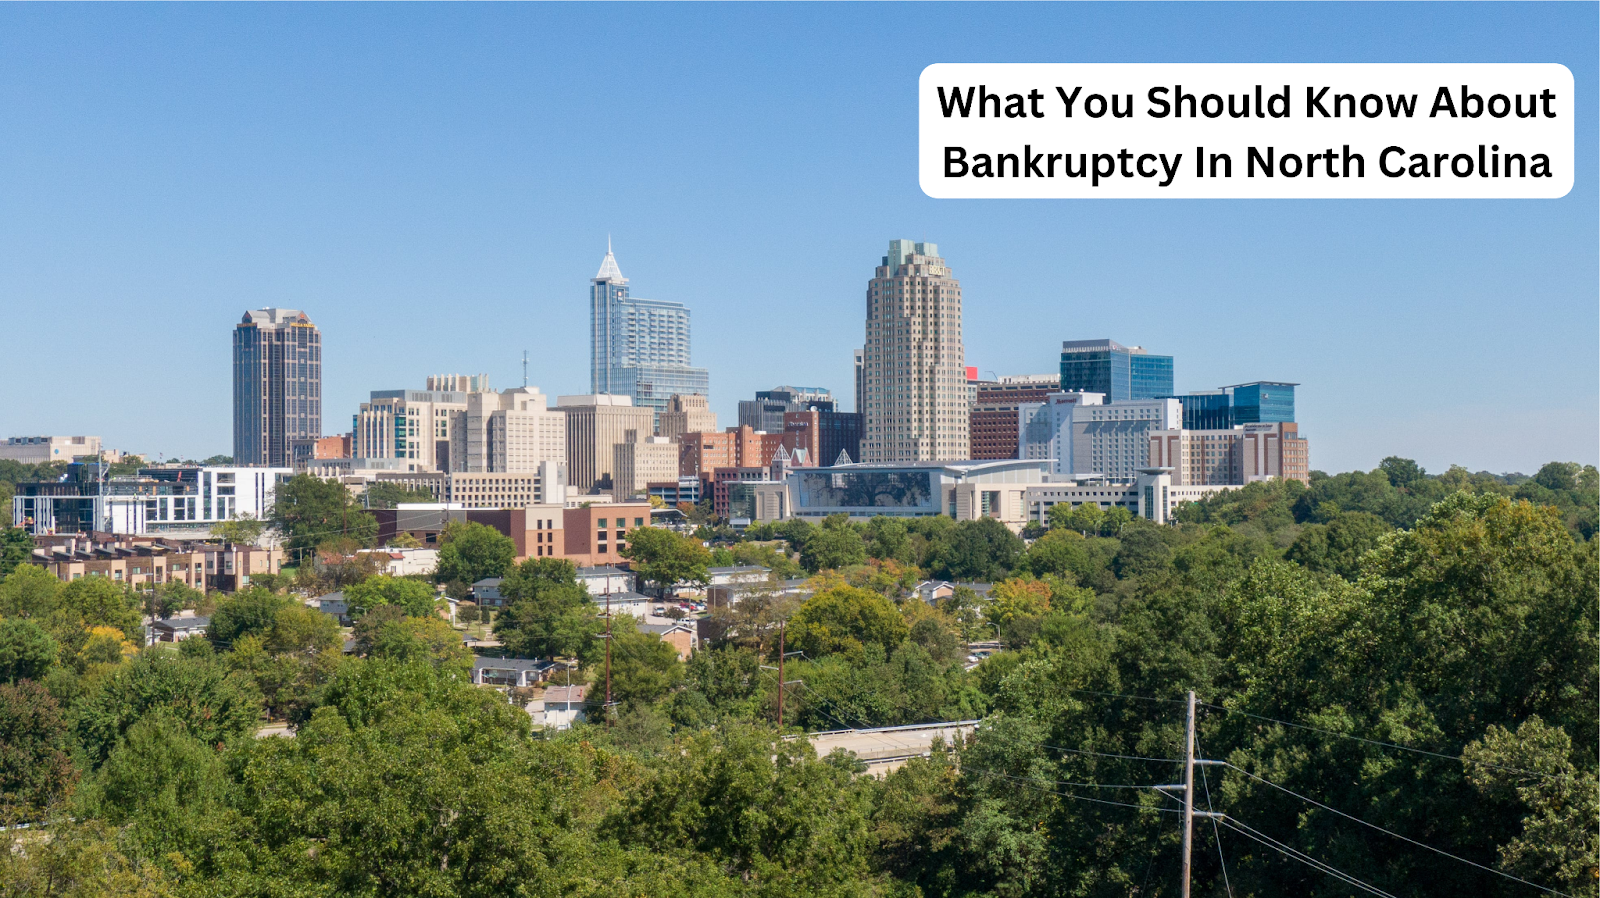 What You Should Know About Bankruptcy In North Carolina